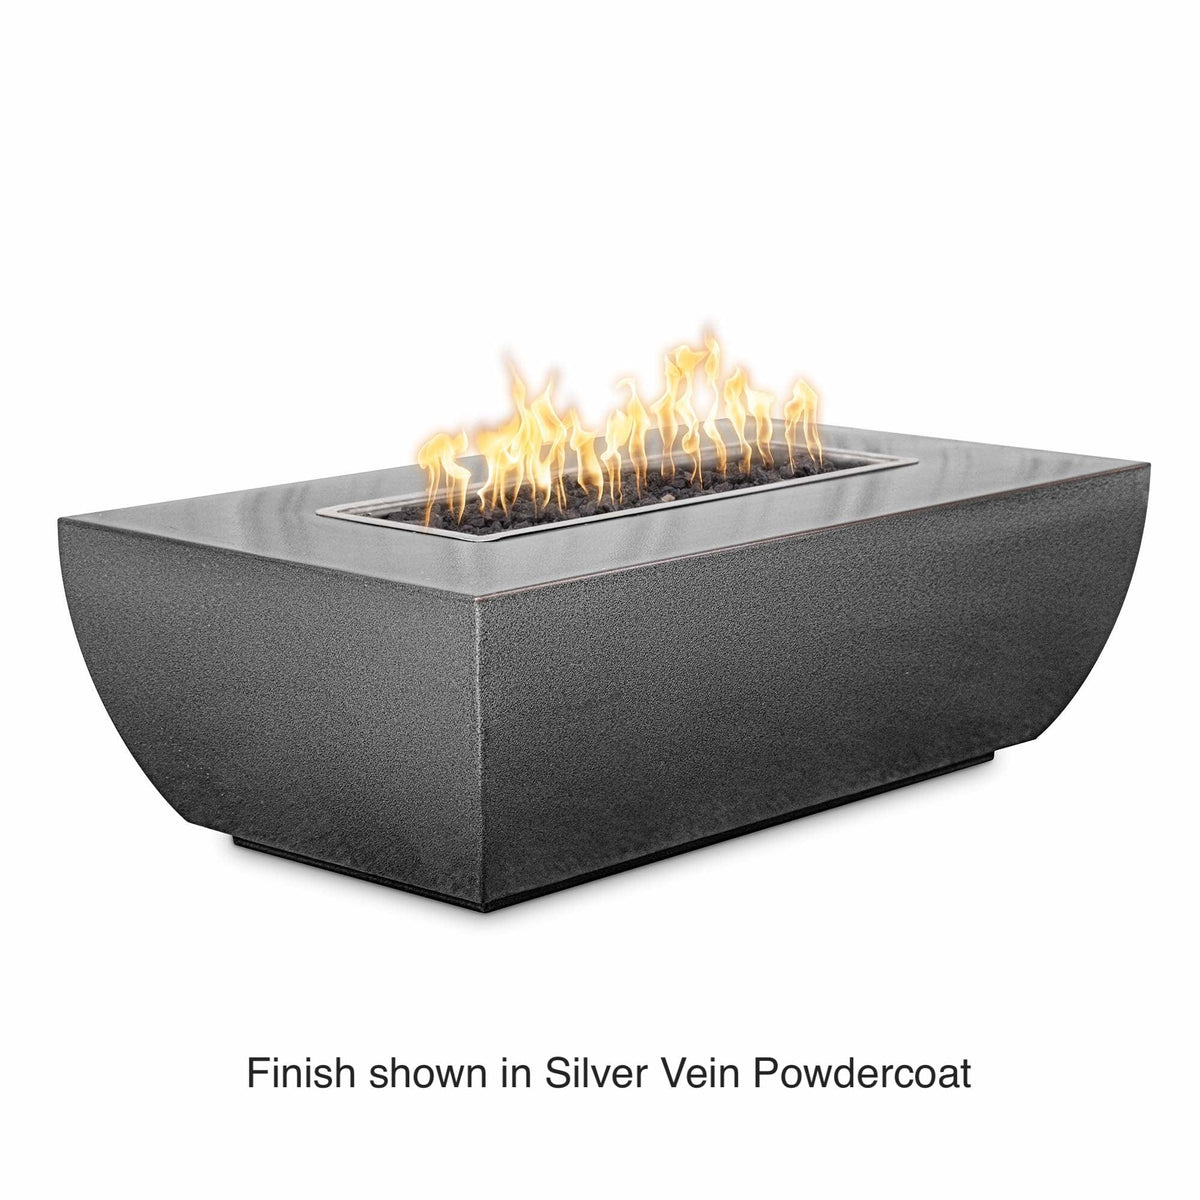 The Outdoor Plus Fire Features The Outdoor Plus 15&quot; Tall 48&quot;, 60&quot;, 72&quot;, 84&quot; Rectangular Avalon Powder Coated Fire Pit / OPT-AVLPCxx15, OPT-AVLPCxx15FSML, OPT-AVLPCxx15FSEN, OPT-AVLPCxx15E12V, OPT-AVLPCxx15EKIT